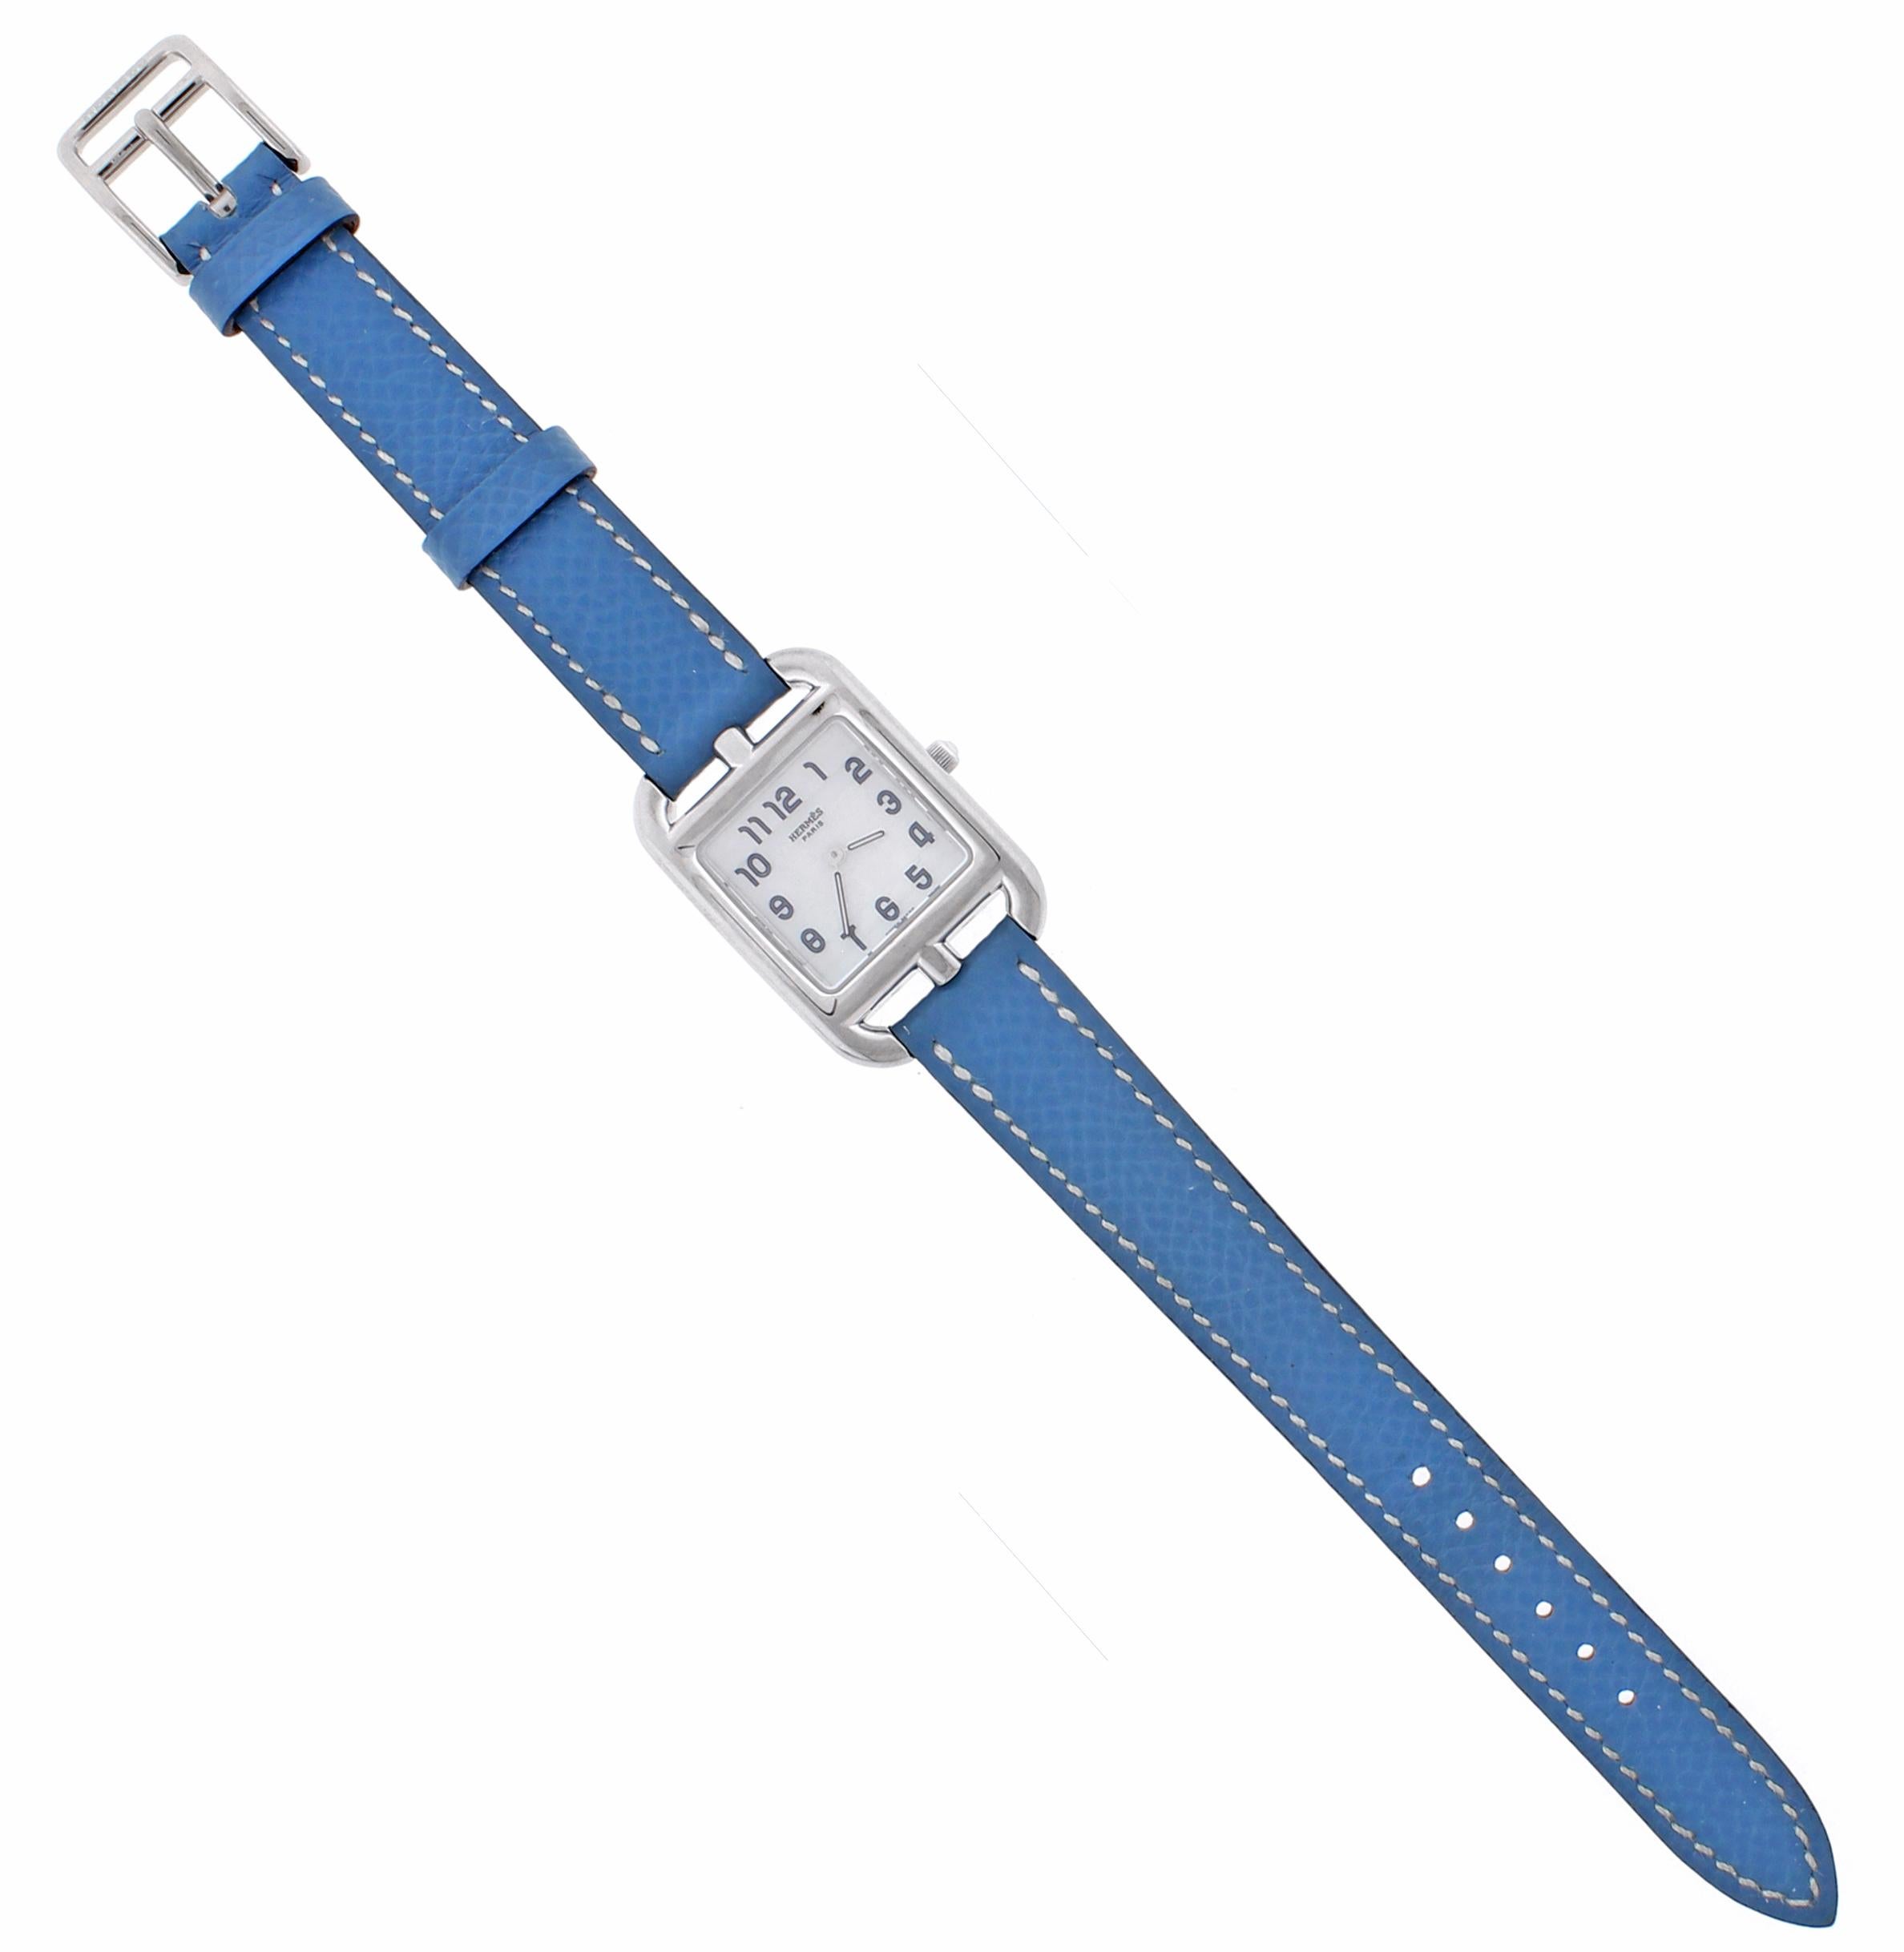 From Hermes, an elegant ladies wrist watch from their cape cod collection
♦ Designer: Hermes
♦ 18 karat  white gold square case 23mm X 23mm
♦ Blue polished leather strap with 18 karat white gold tang/pin buckle
♦ Solid screwed-in case back adorned